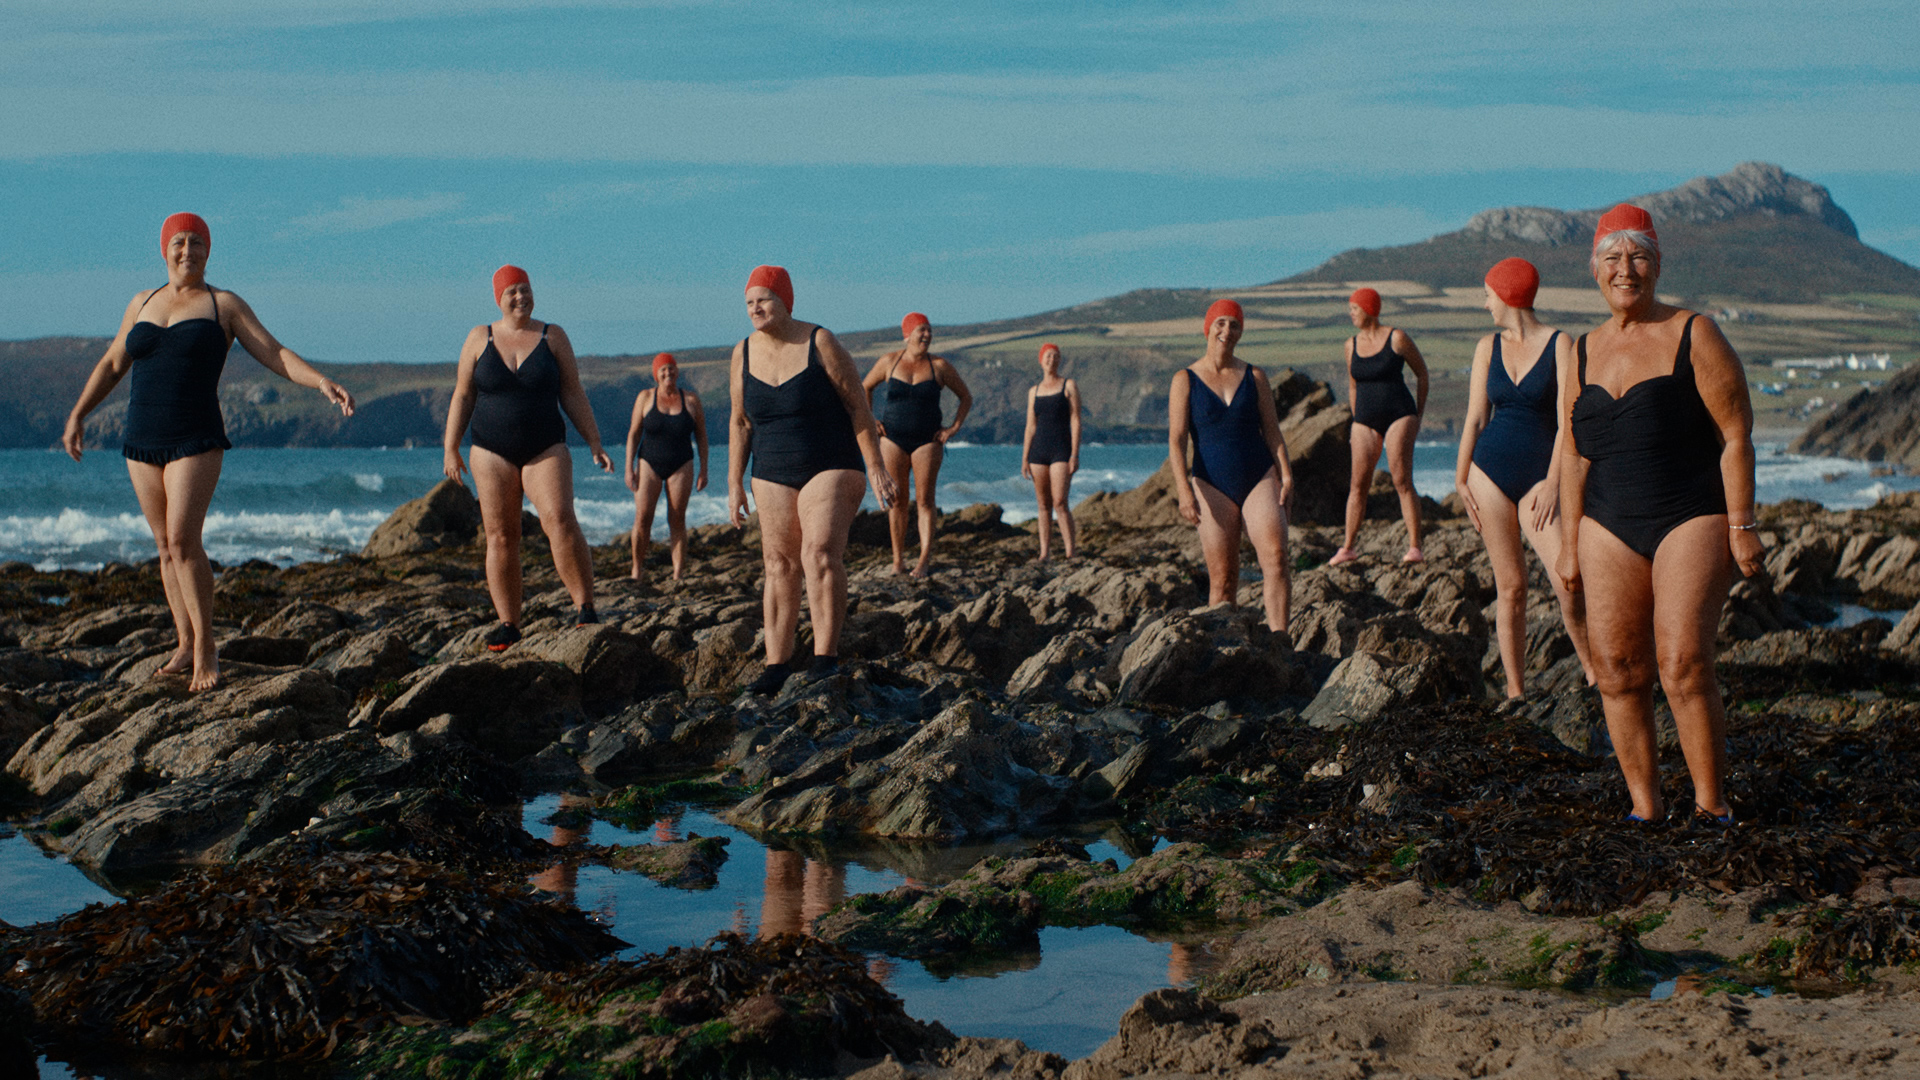 Scarlett Bovingdon edits Our Sisterhood - Soul Swimmers with Irene Baque and Virtue.